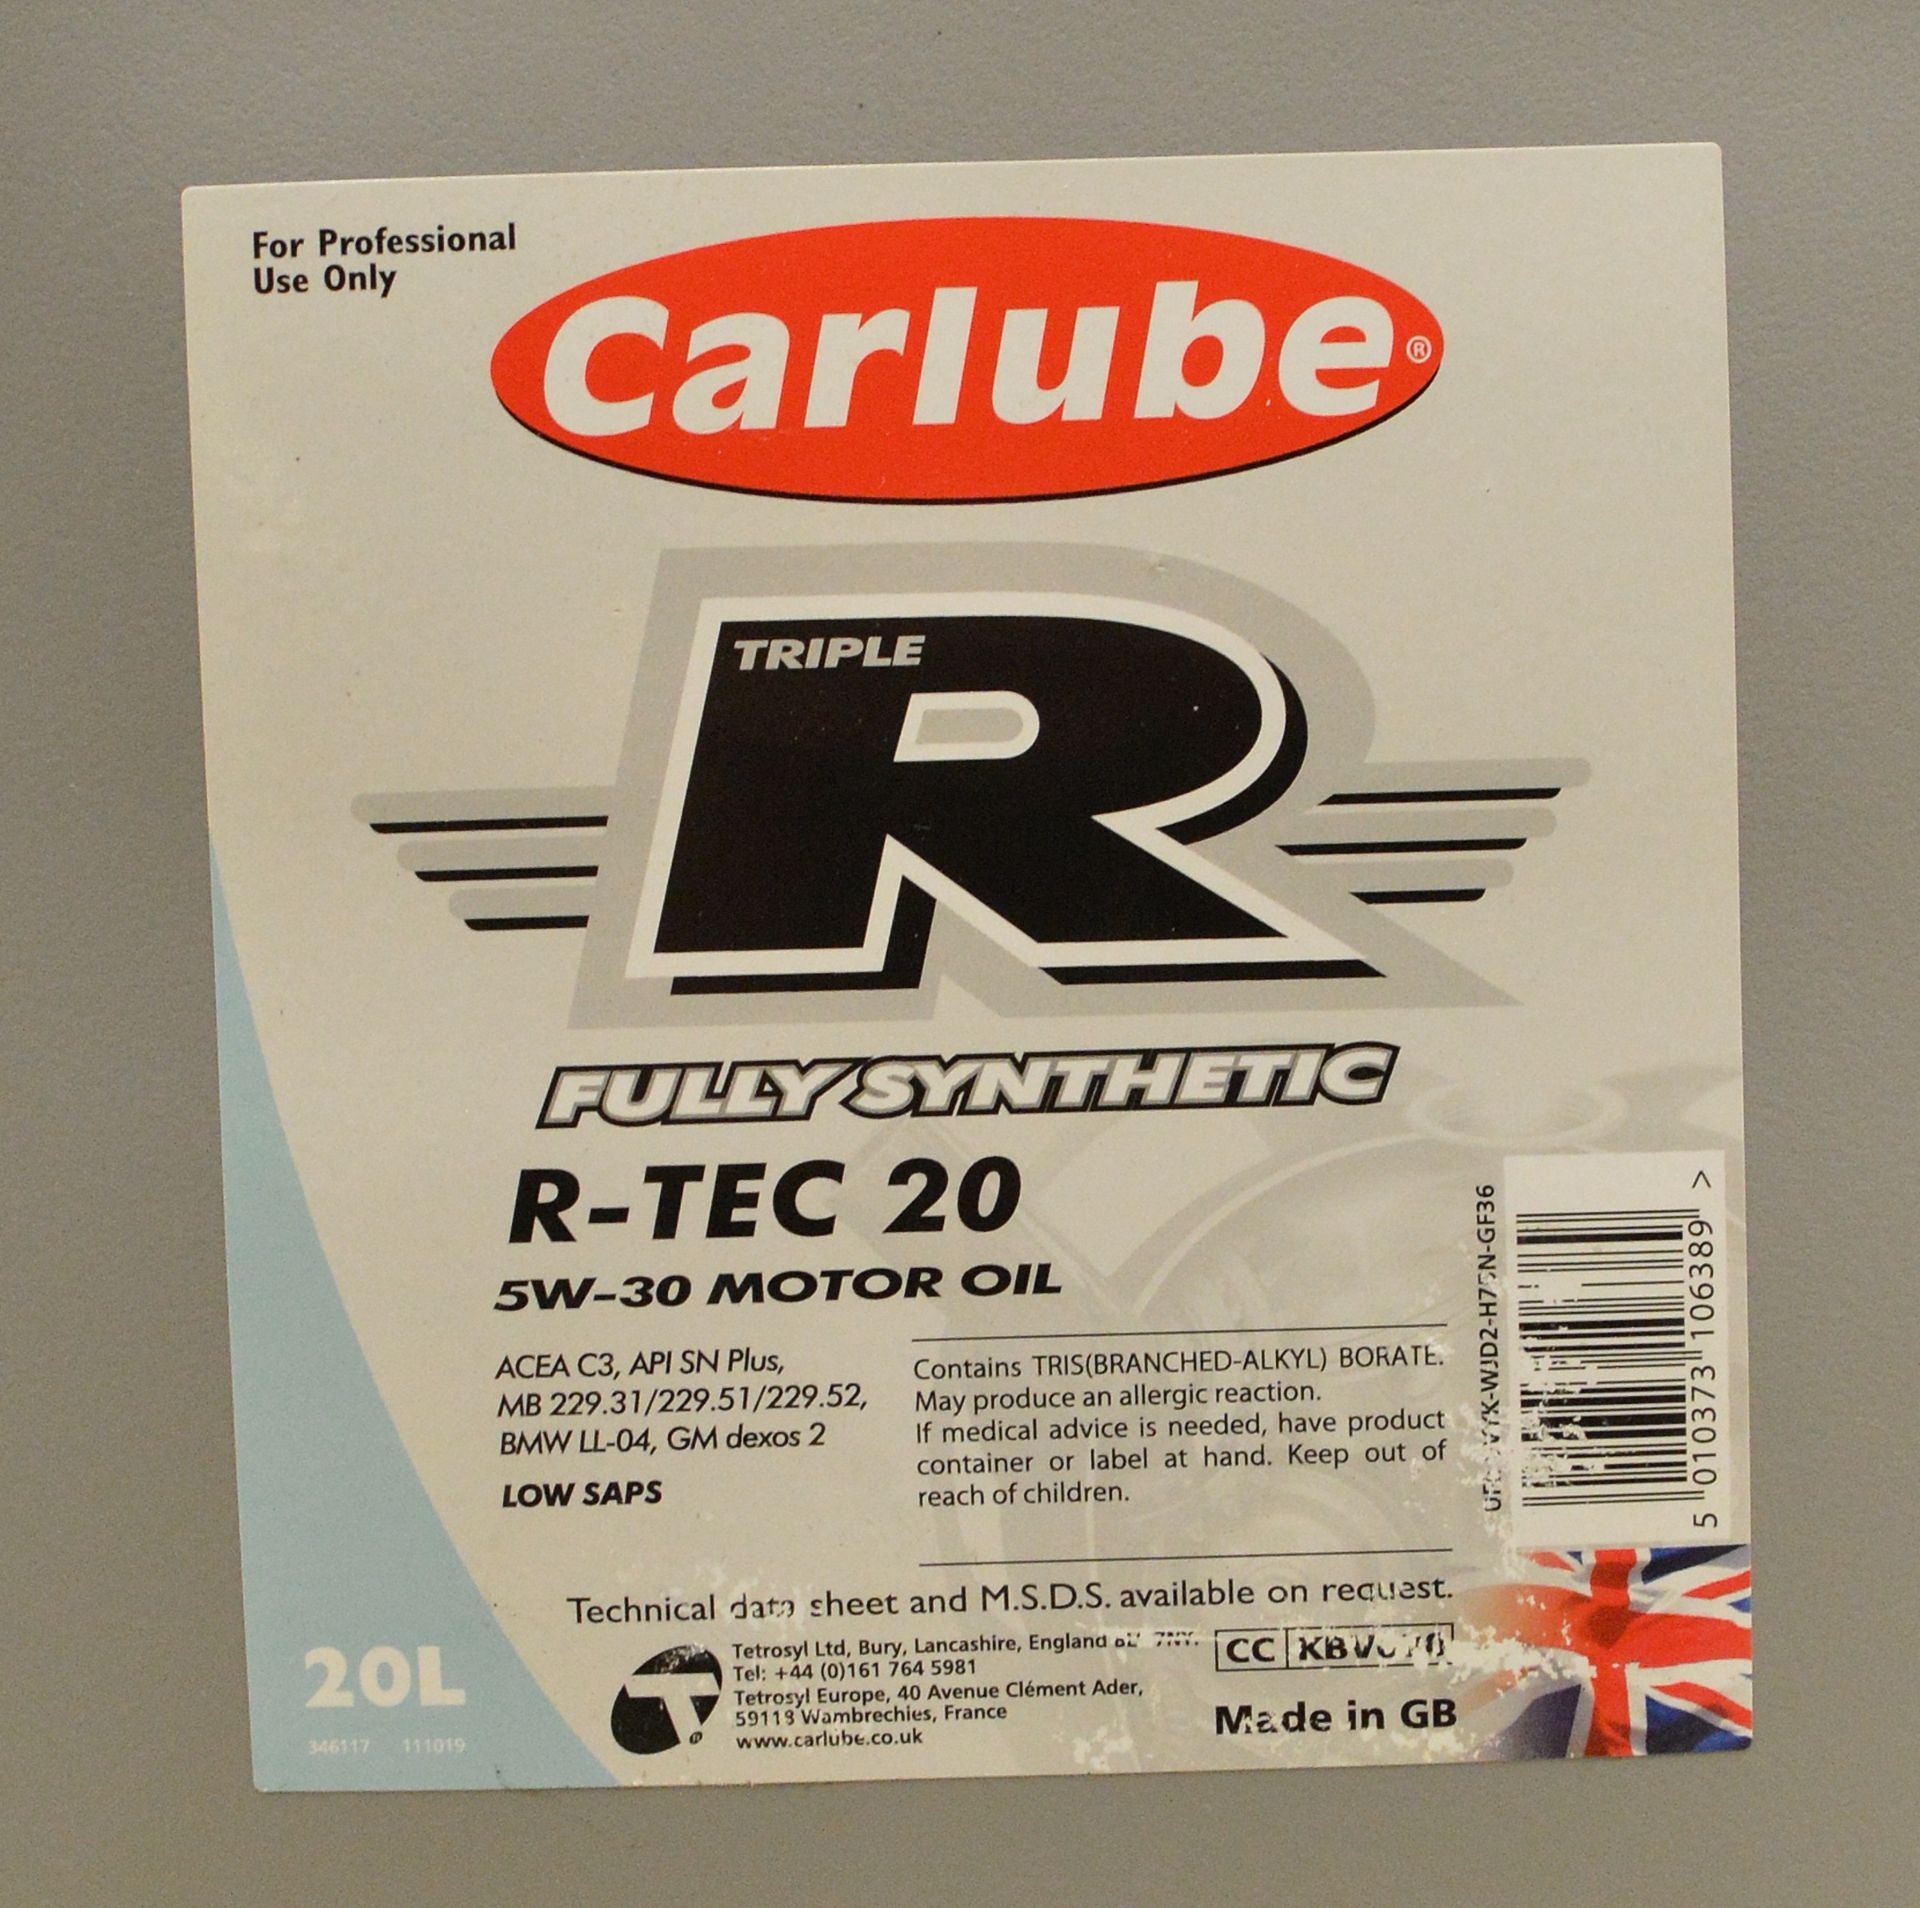 20L Carlube 5W-30 R-Tec 20 Fully Synthetic Motor Oil - Image 2 of 2